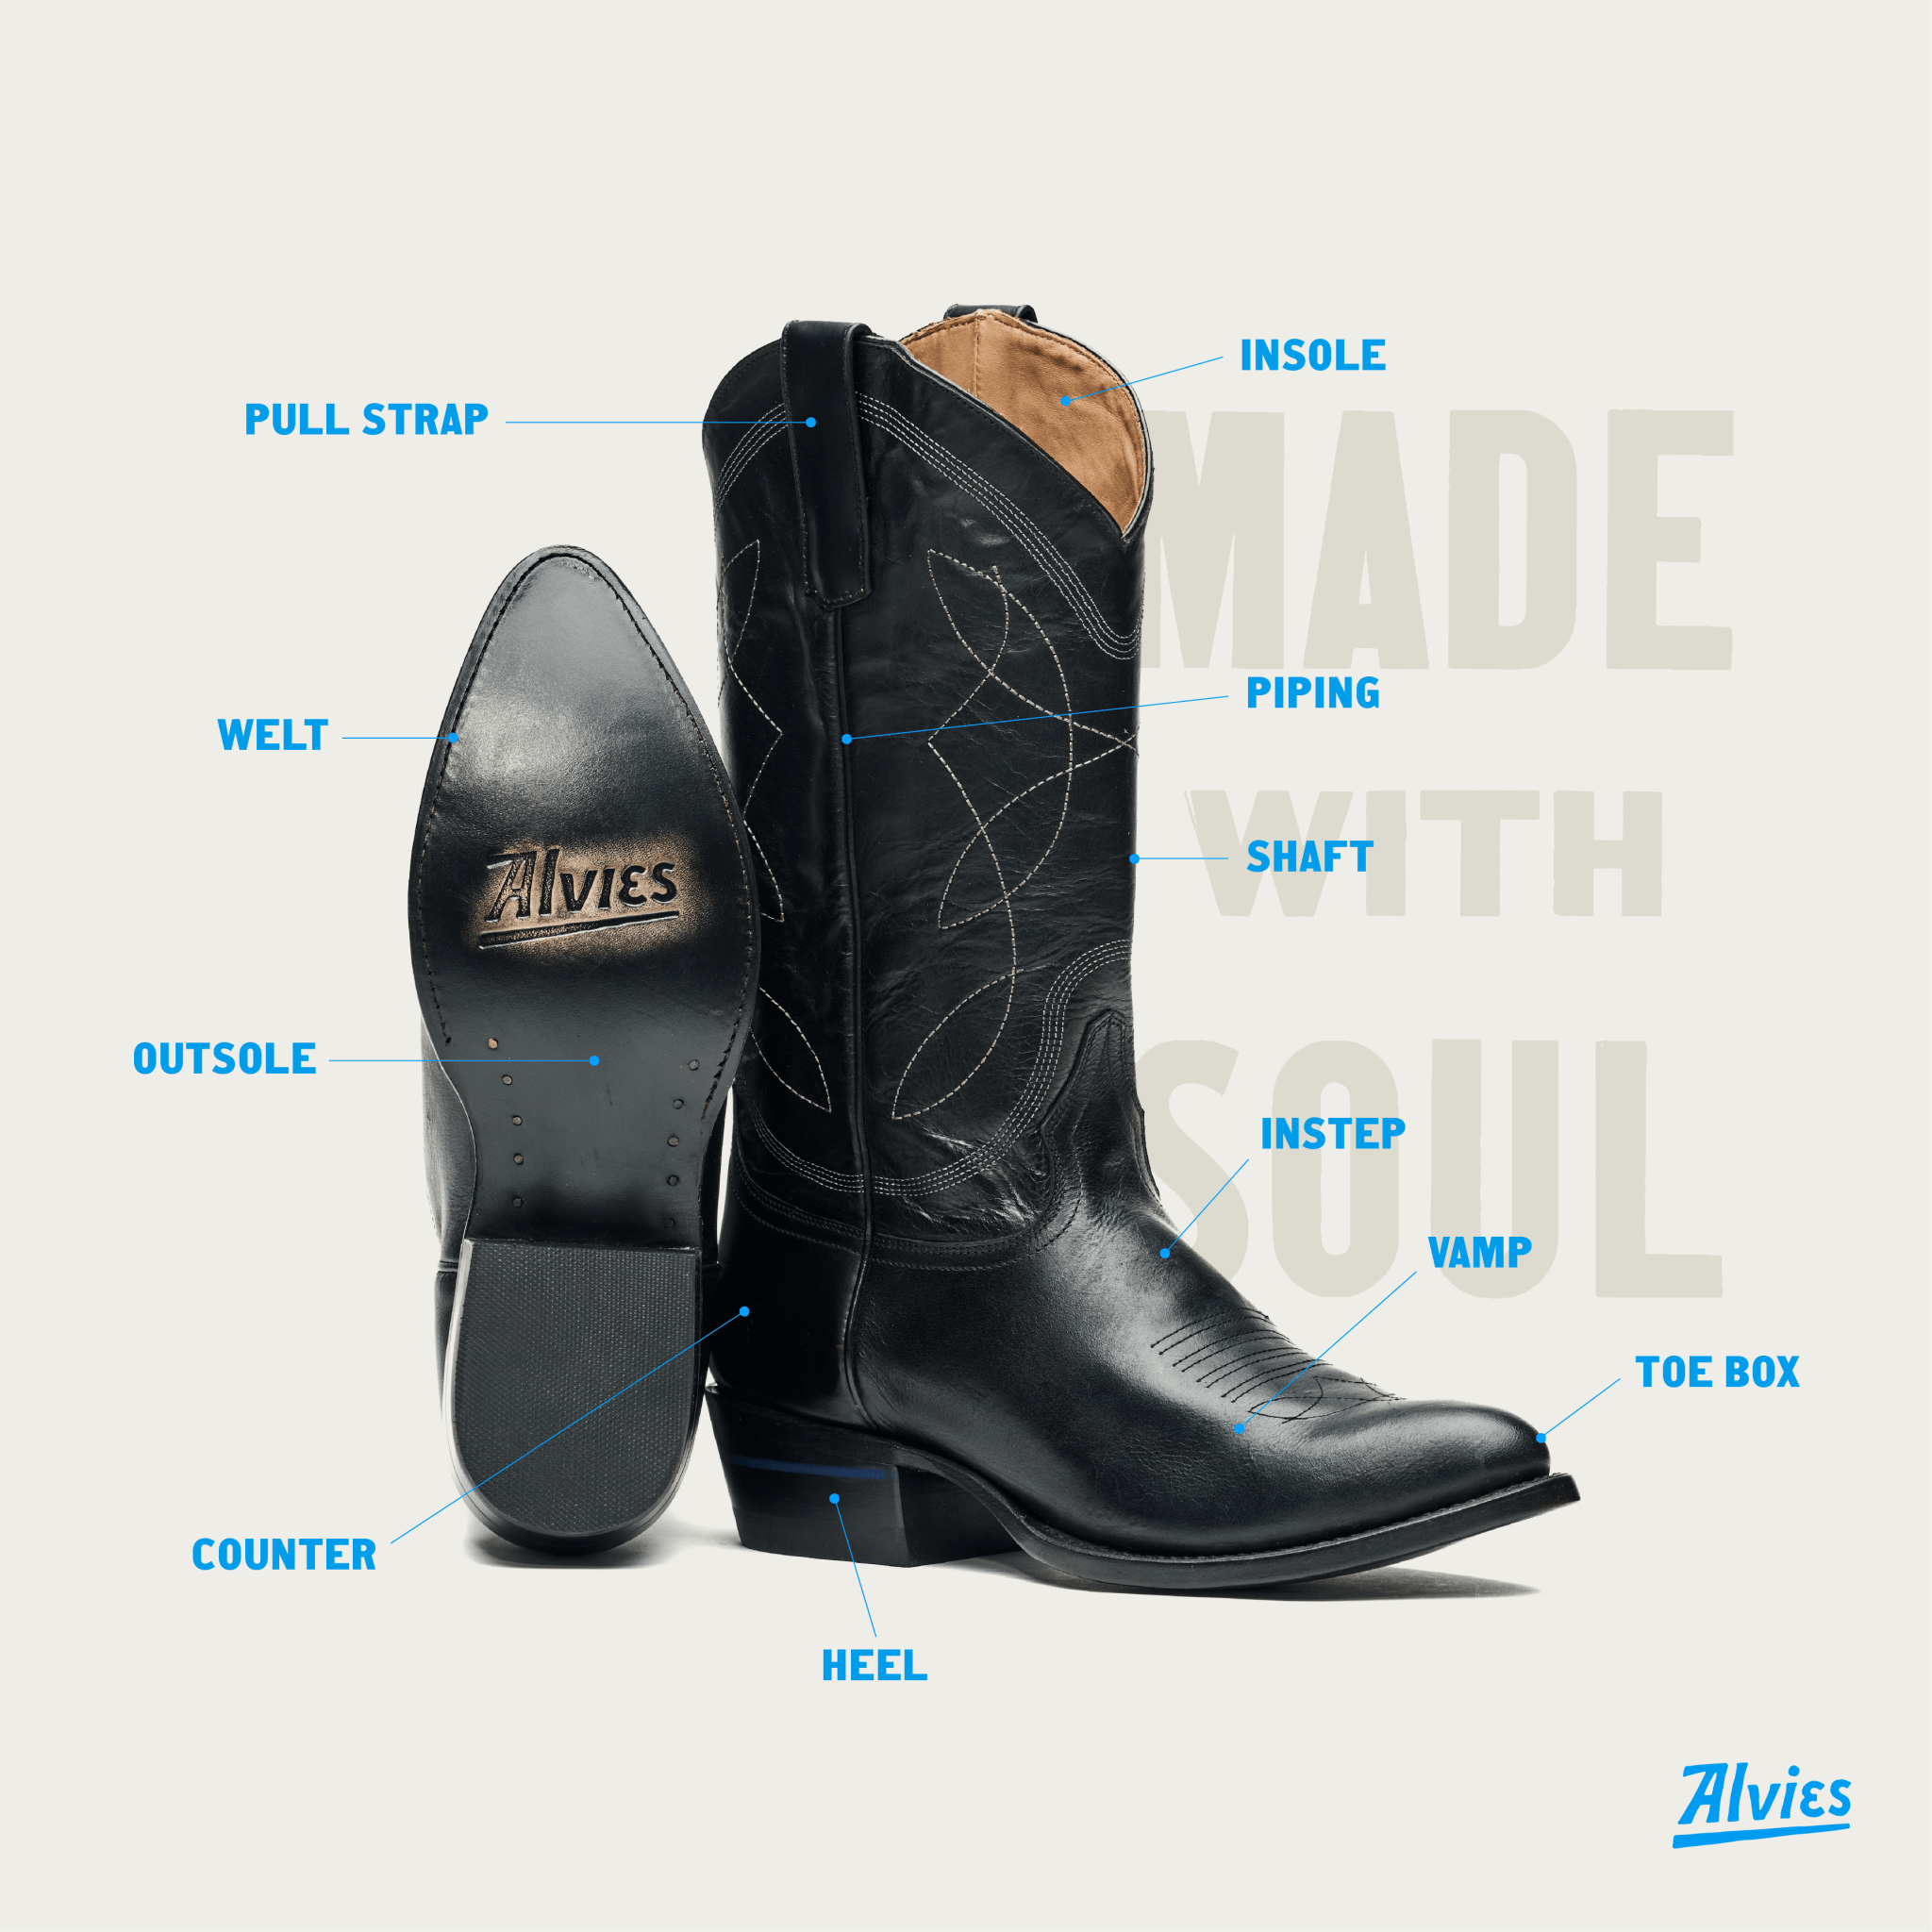 From heel to toe: the anatomy of a cowboy boot - Alvies